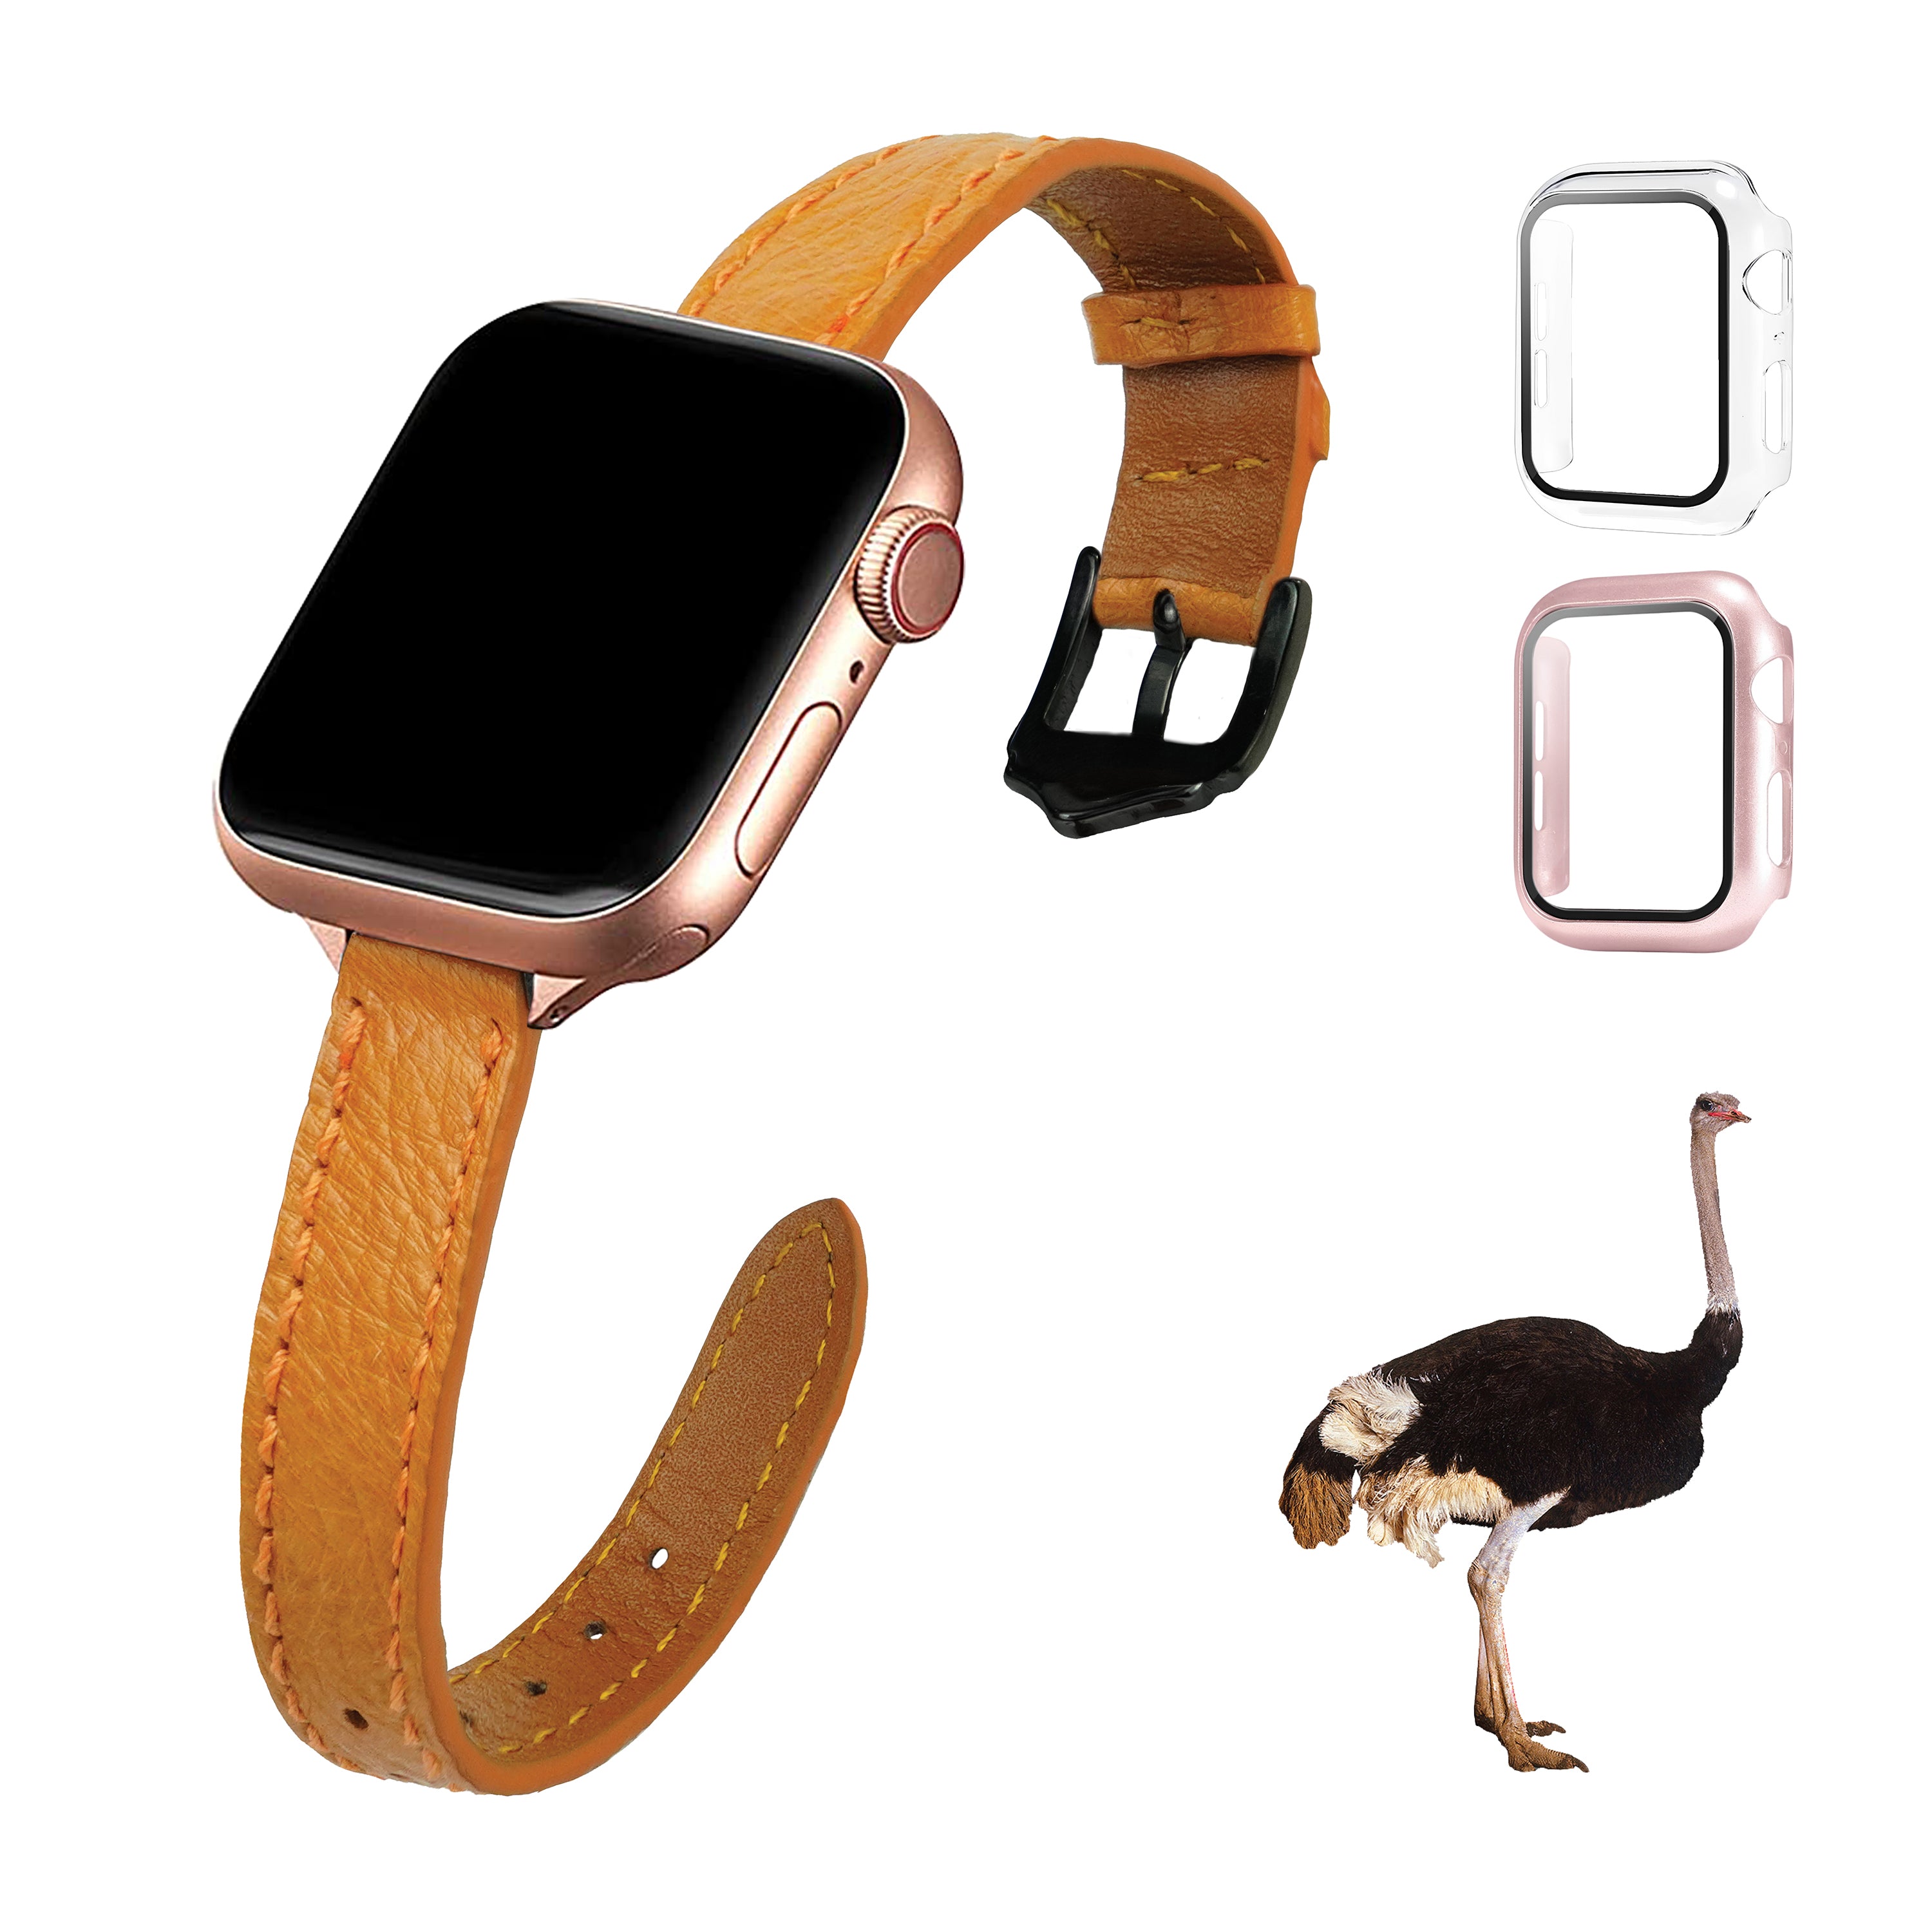 Tan Flat Ostrich Leather Band Compatible Apple Watch Iwatch 44mm Screen Protector Case Black Adapter Replacement Strap For Smartwatch Series 4 5 6 SE Leather Handmade AW-182B-W-44MM